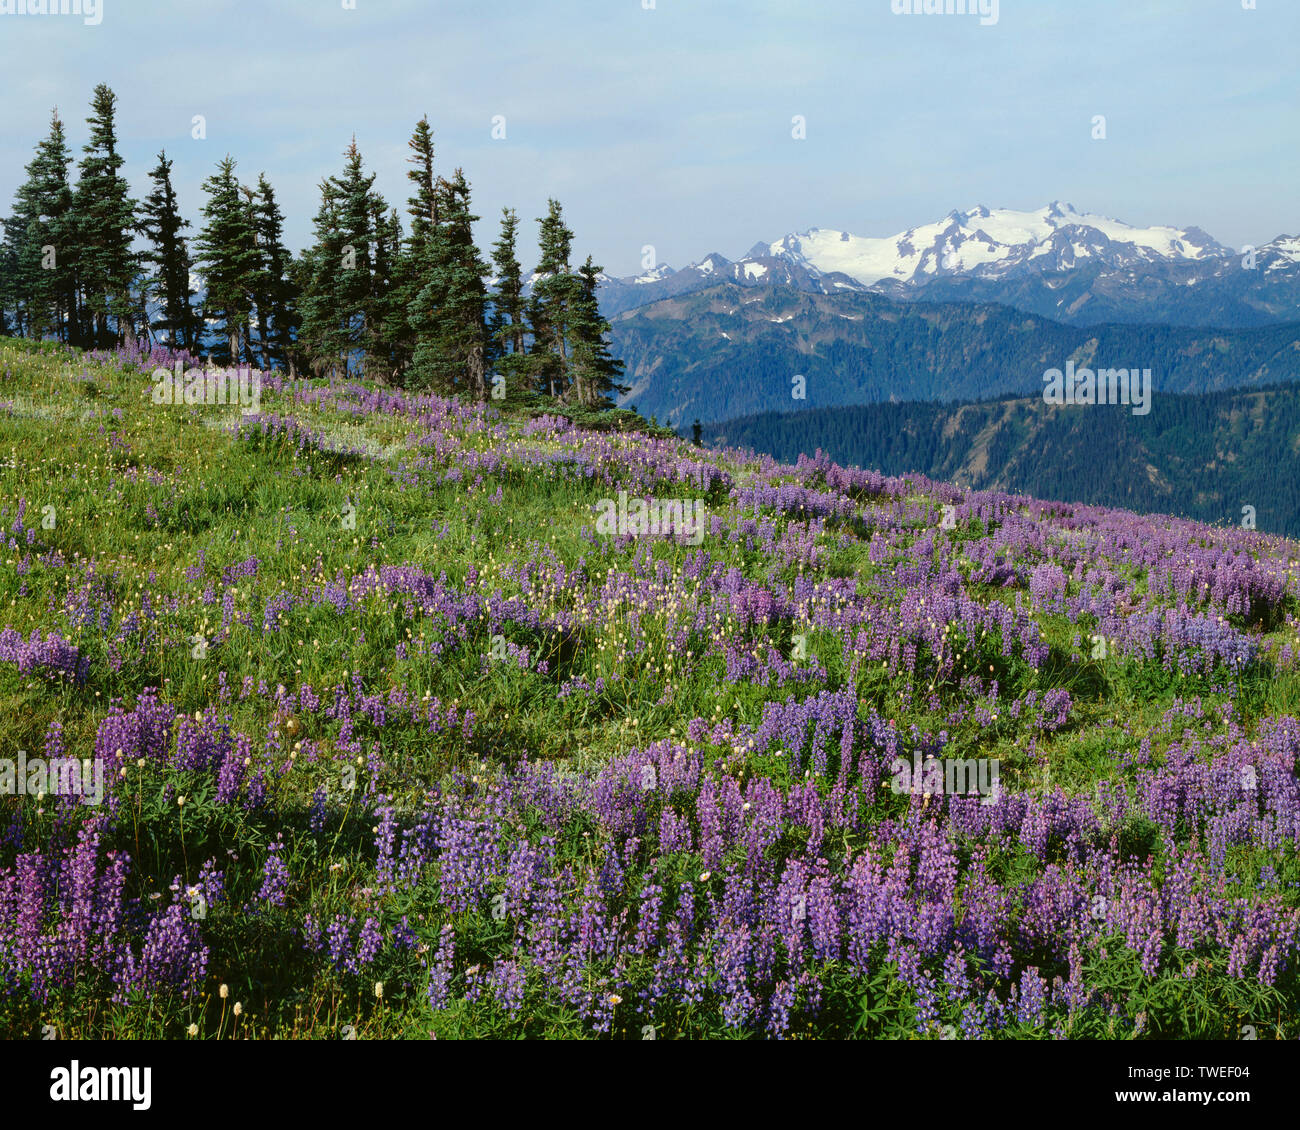 USA, Washington, Olympic National Park, Meadow of broadleaf lupine  and scattered bistort near Obstruction Peak and distant Mt. Olympus. Stock Photo